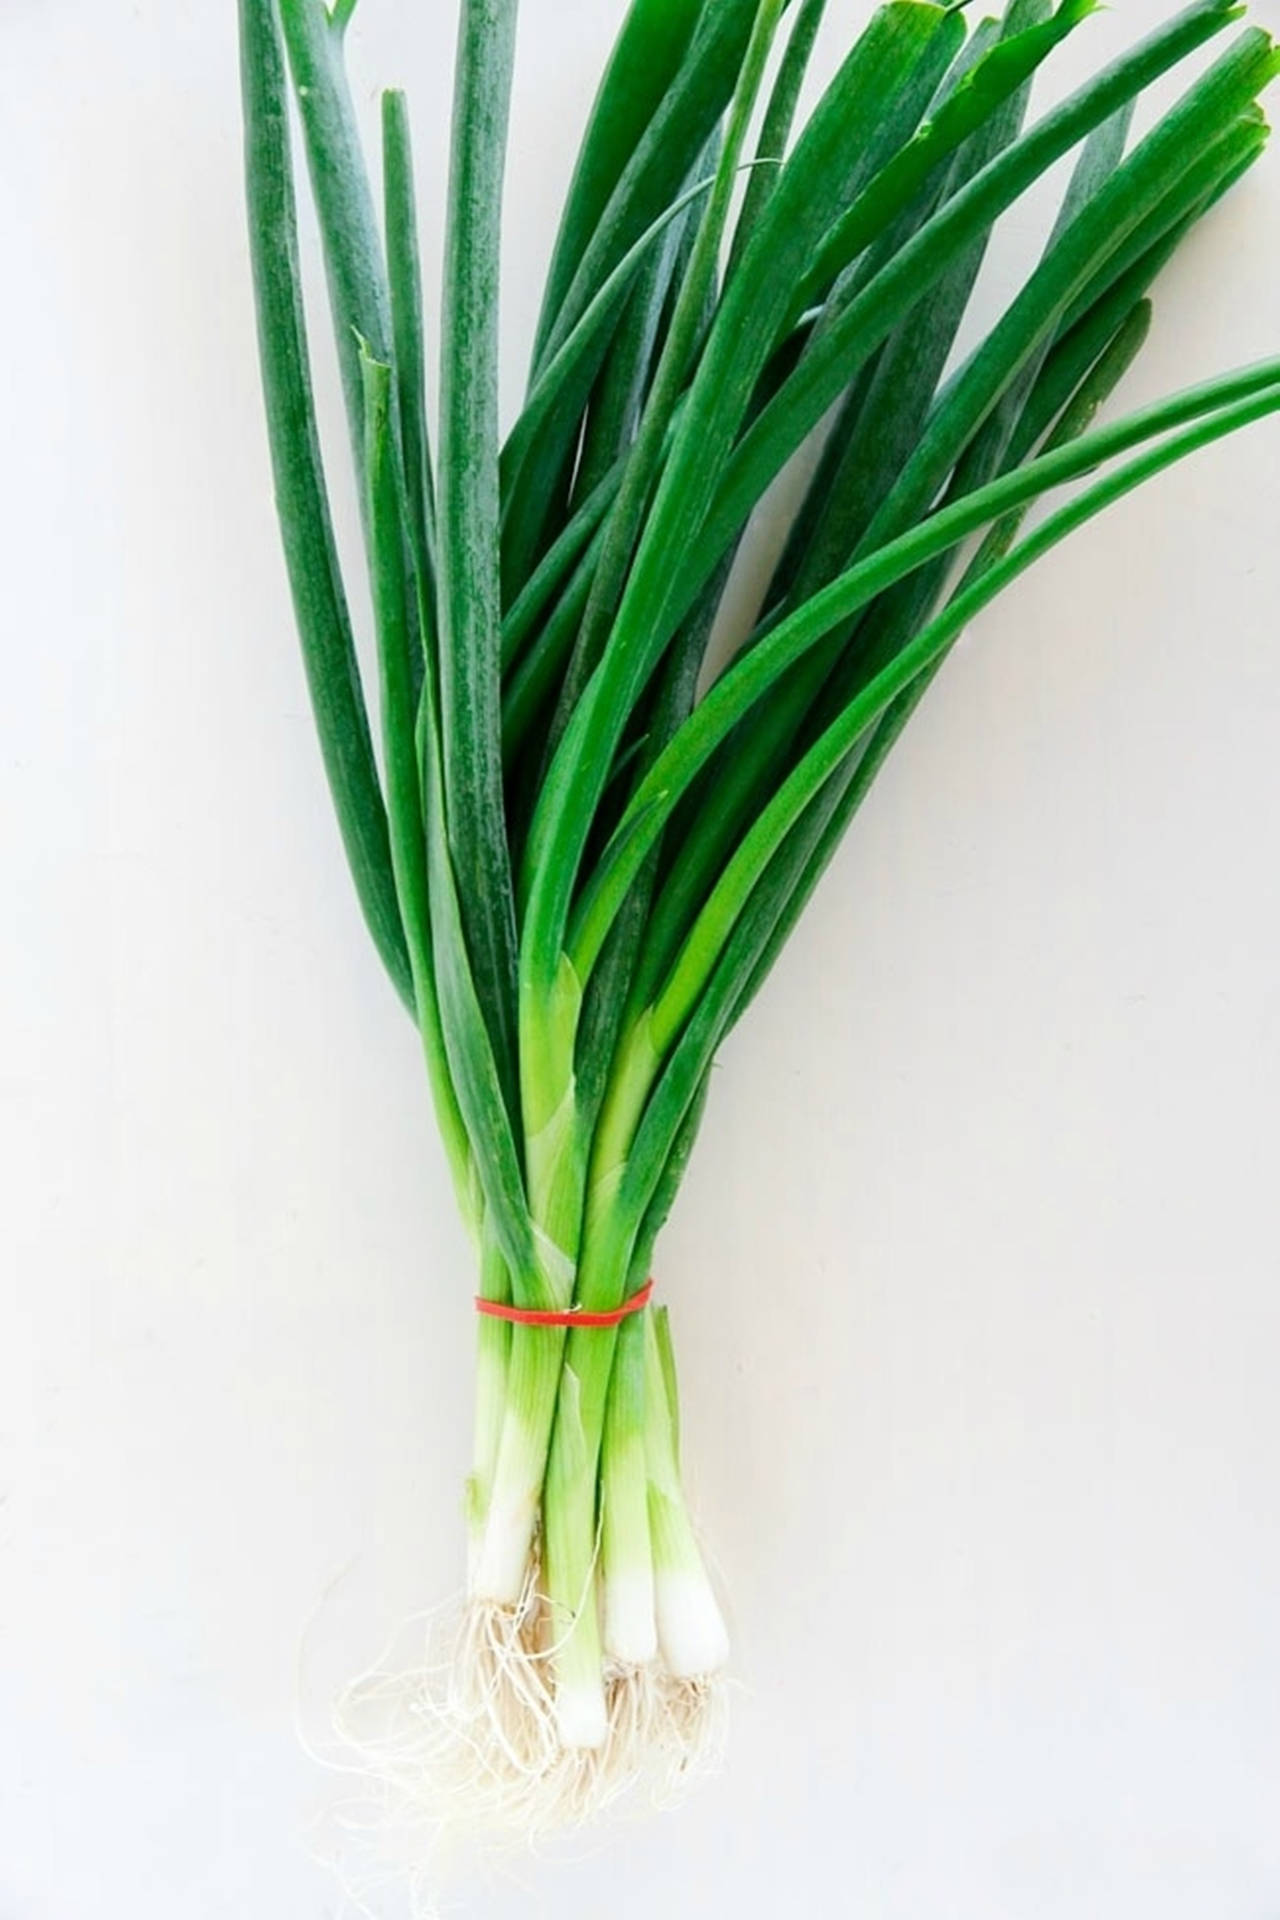 Rubber Band Bunched Green Onion Sprigs Wallpaper